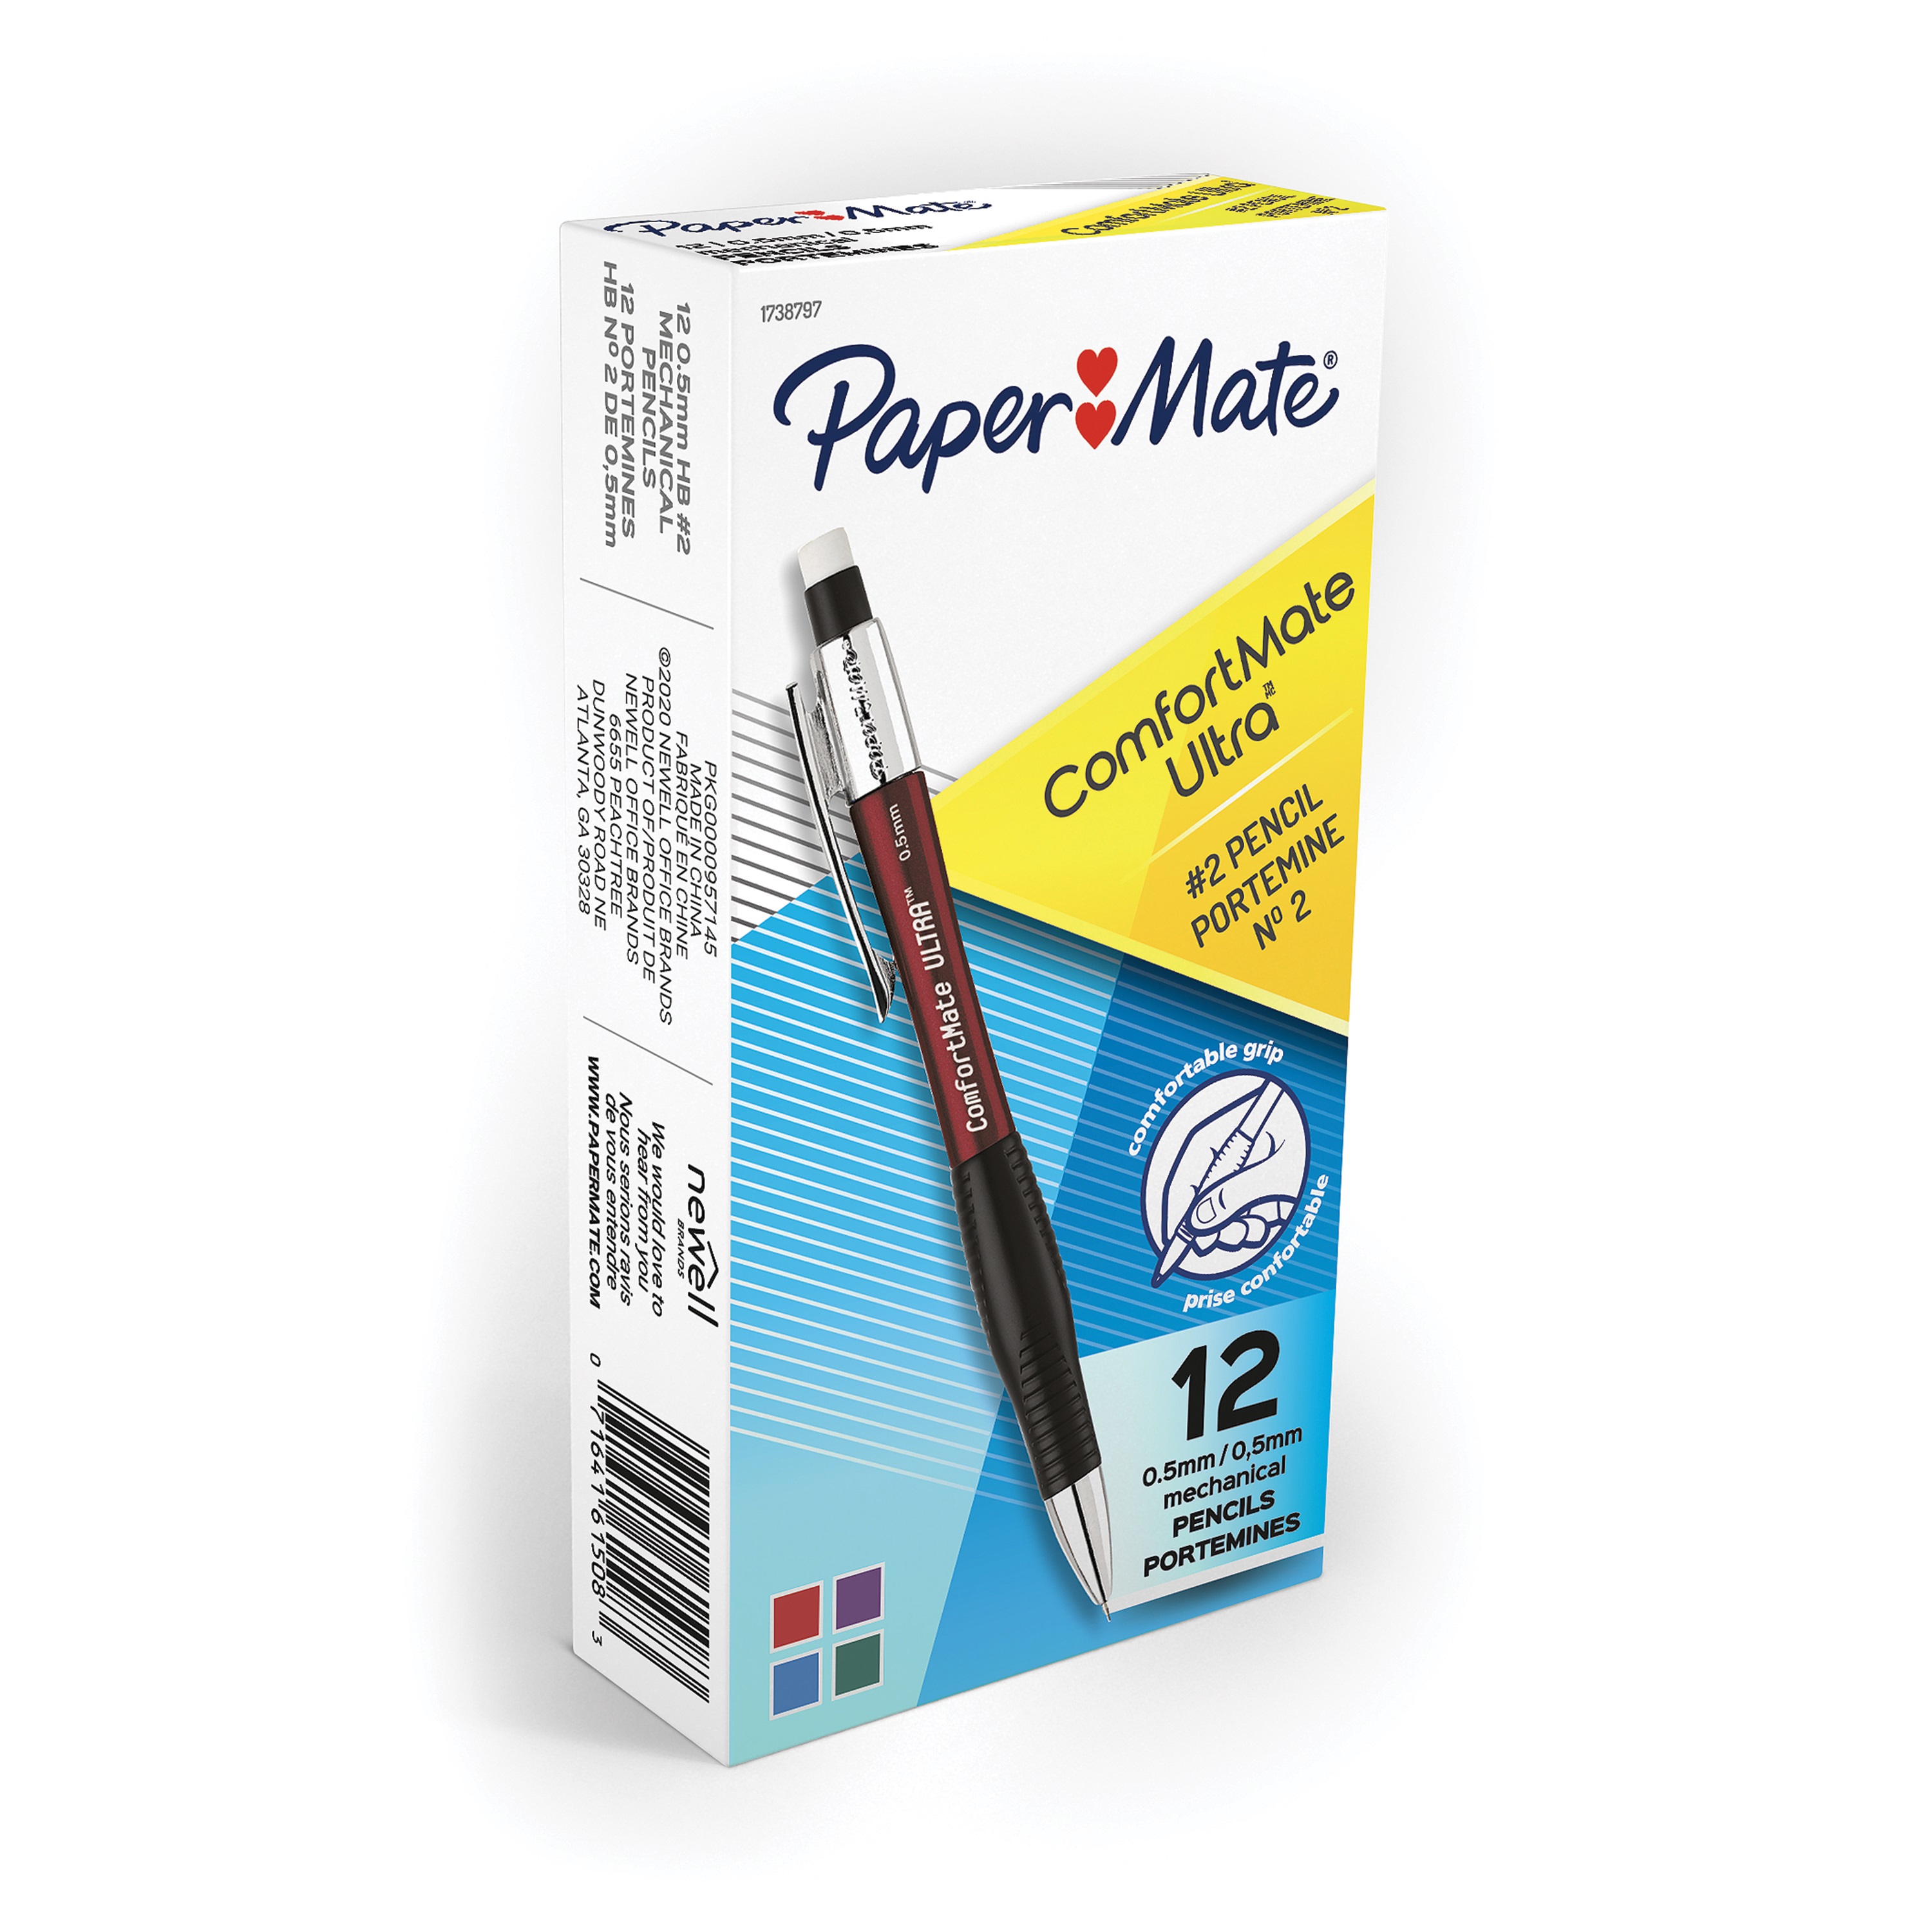 Paper Mate Comfort Mate Ultra Mechanical Pencils, 0.5mm, HB #2, Assorted Colors, 12 Count - image 2 of 6